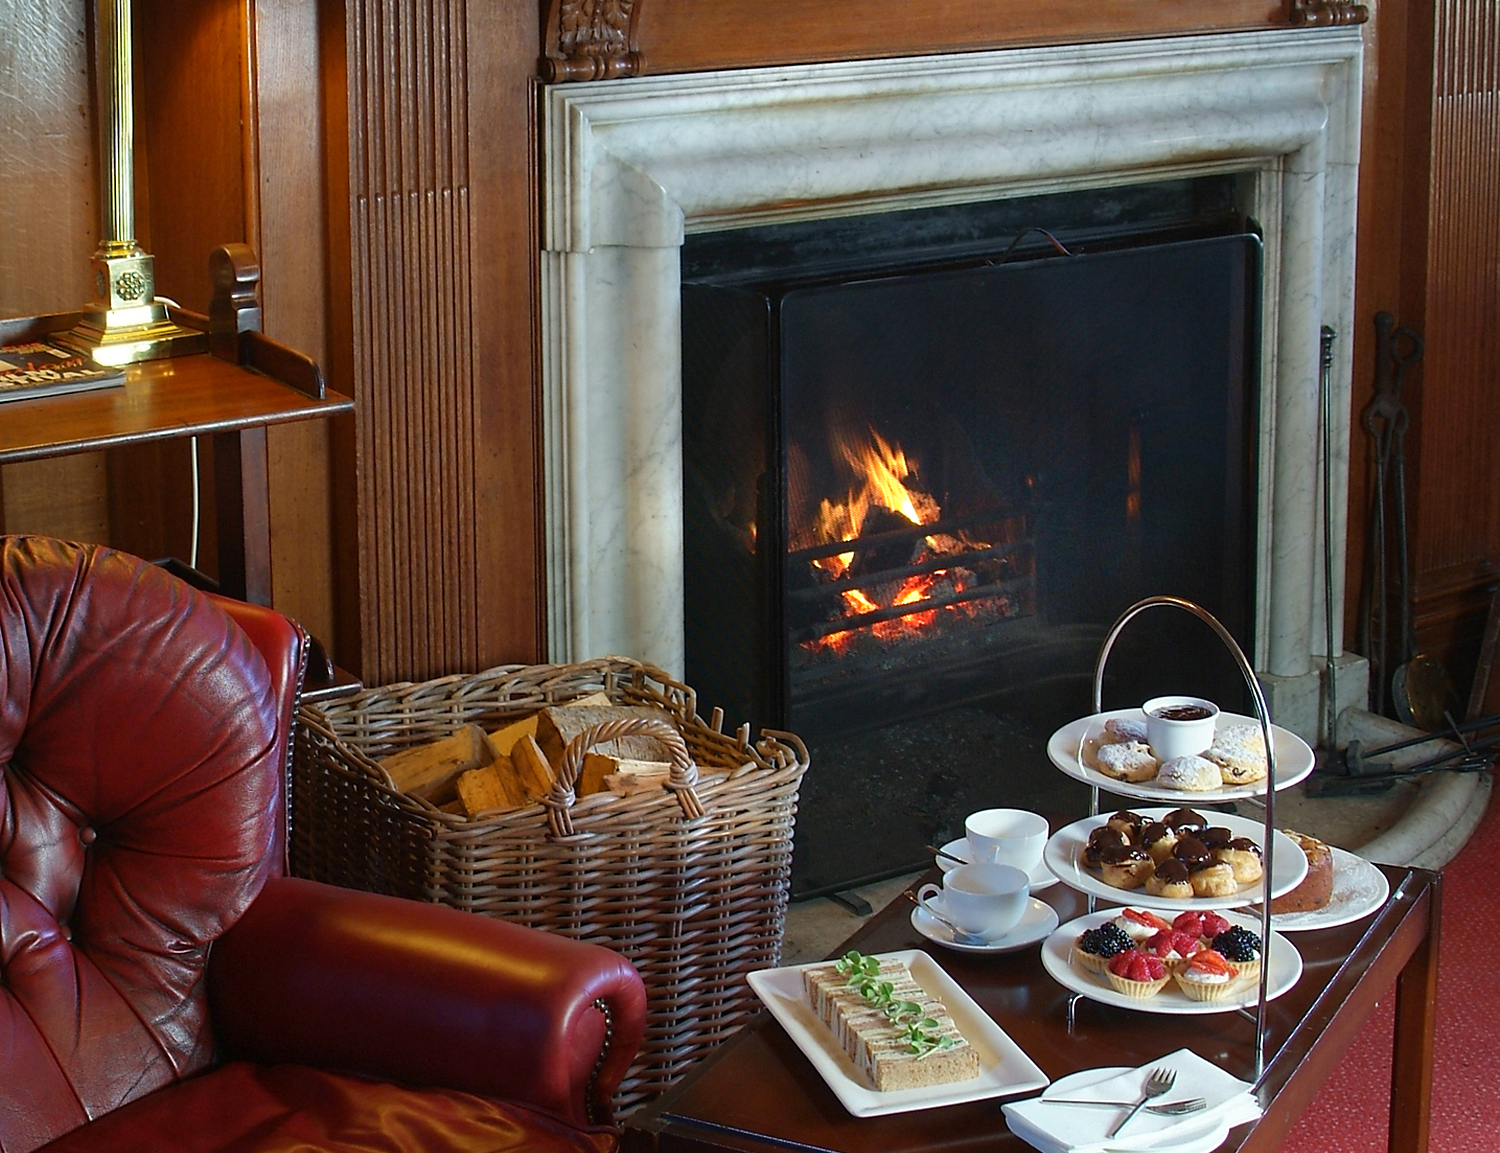 A close up of the fireplace in the Tapestry Hall, featuring an afternoon tea.